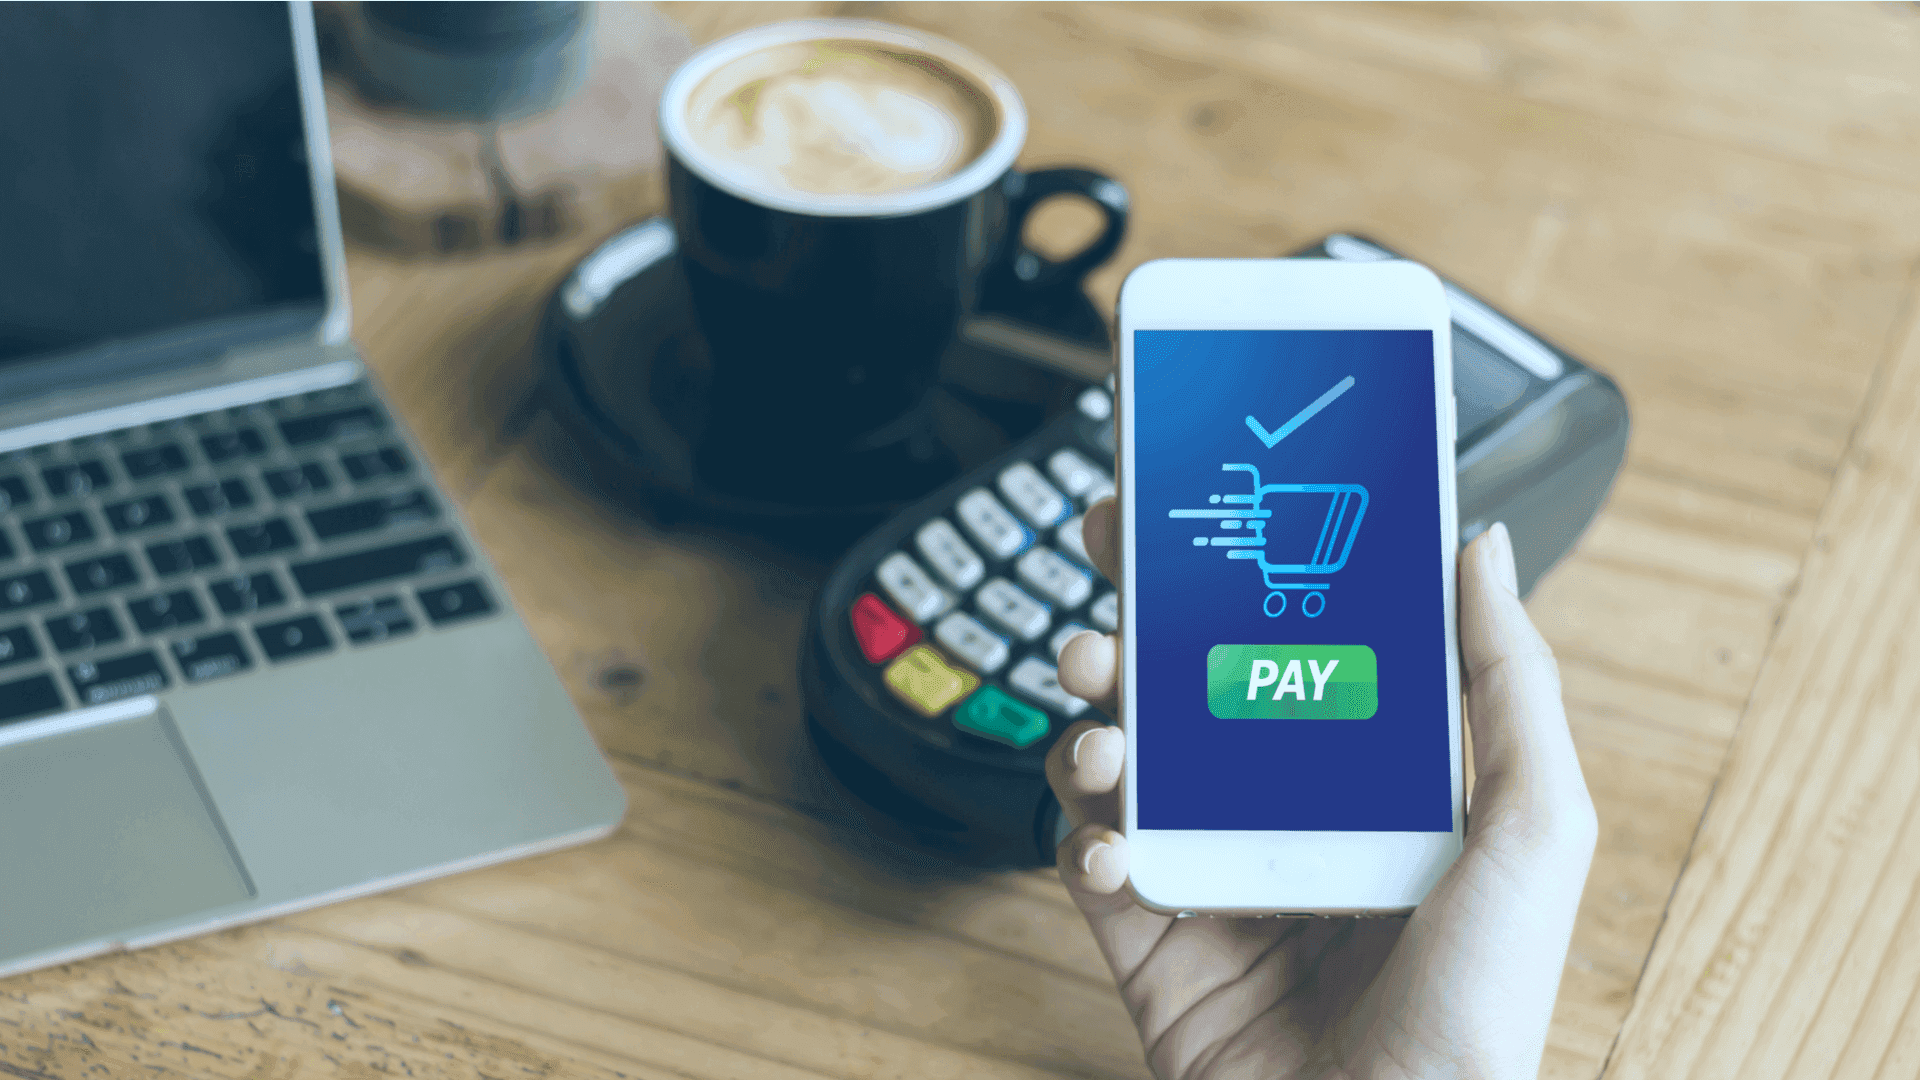 Universal Payments